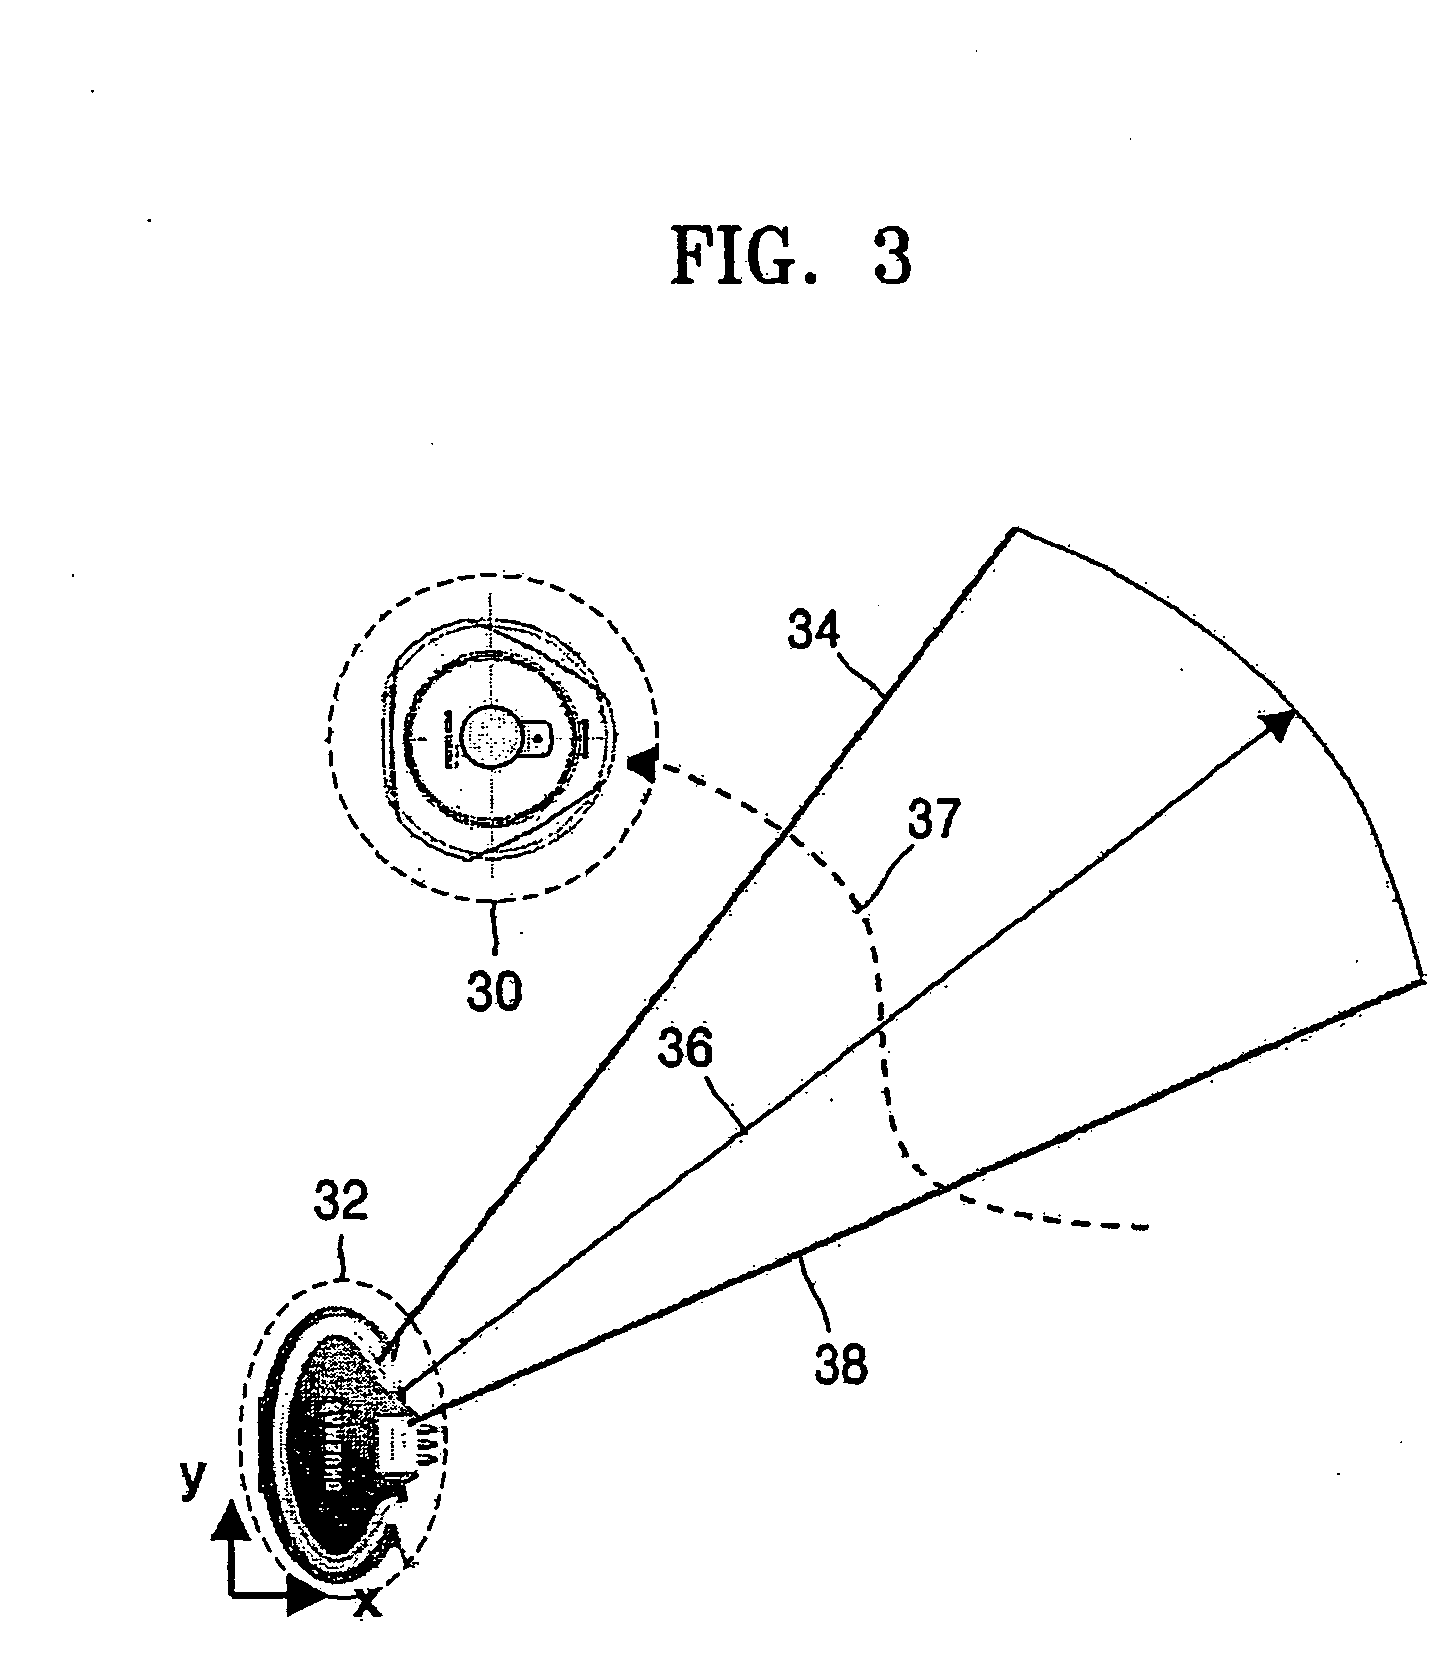 Apparatus and method for correcting location information of mobile body, and computer-readable media storing computer program for controlling the apparatus